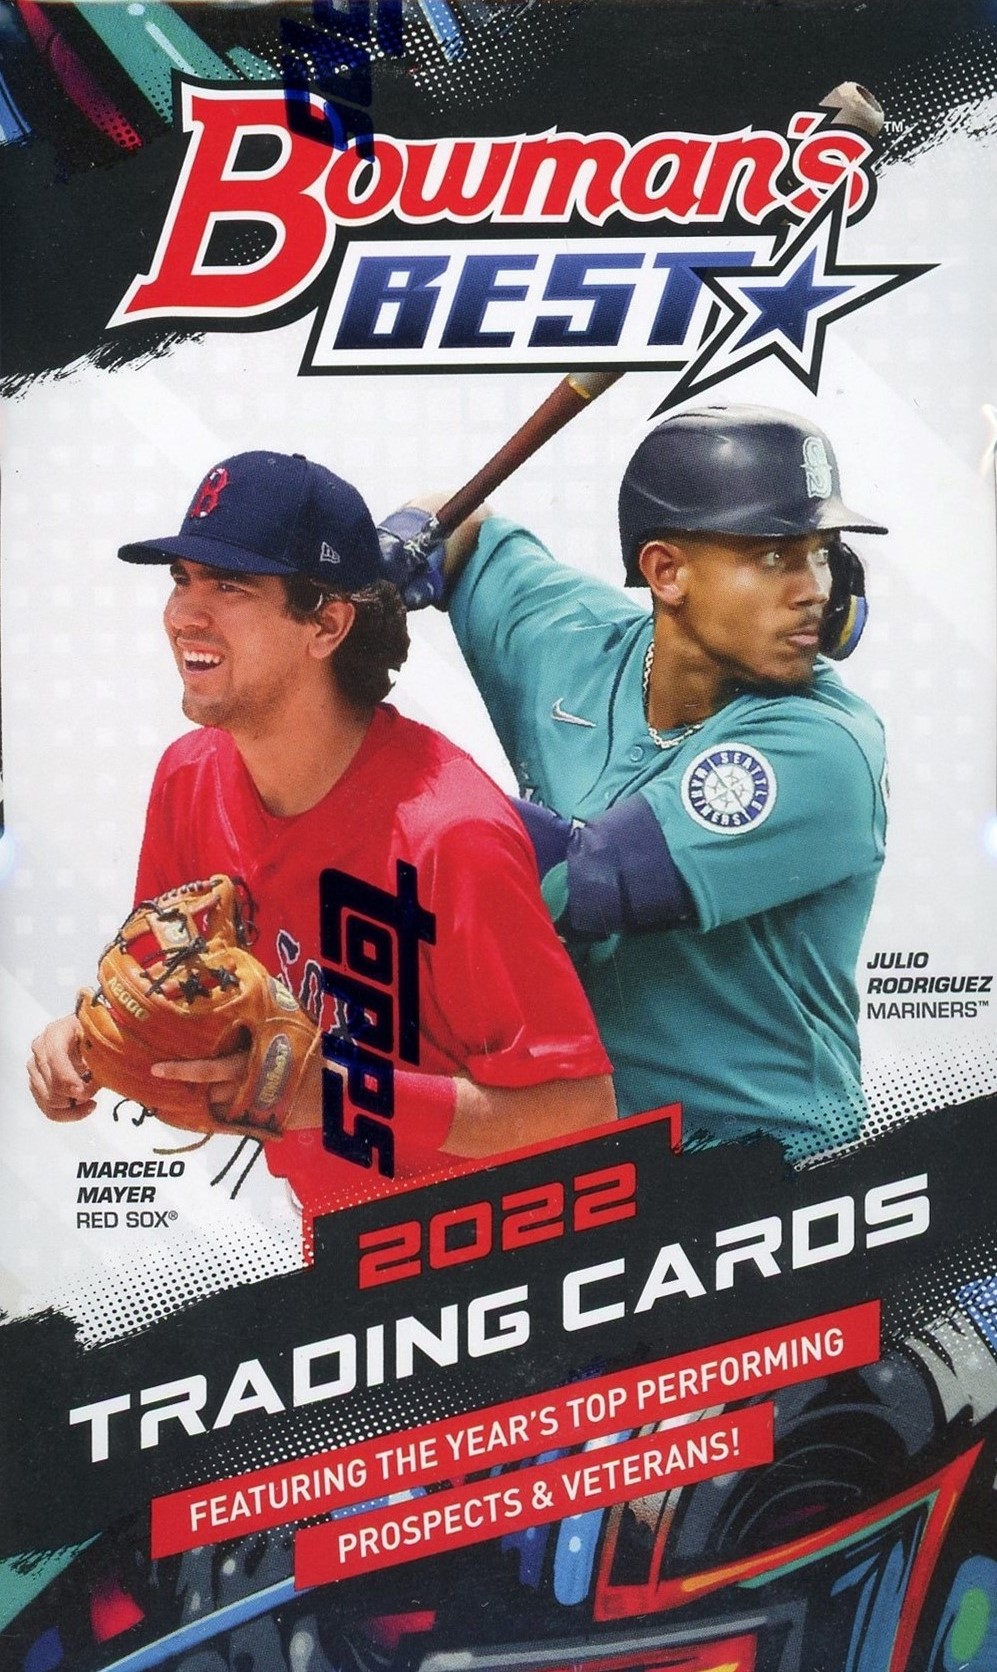 TOPPS Bowman’s best その他